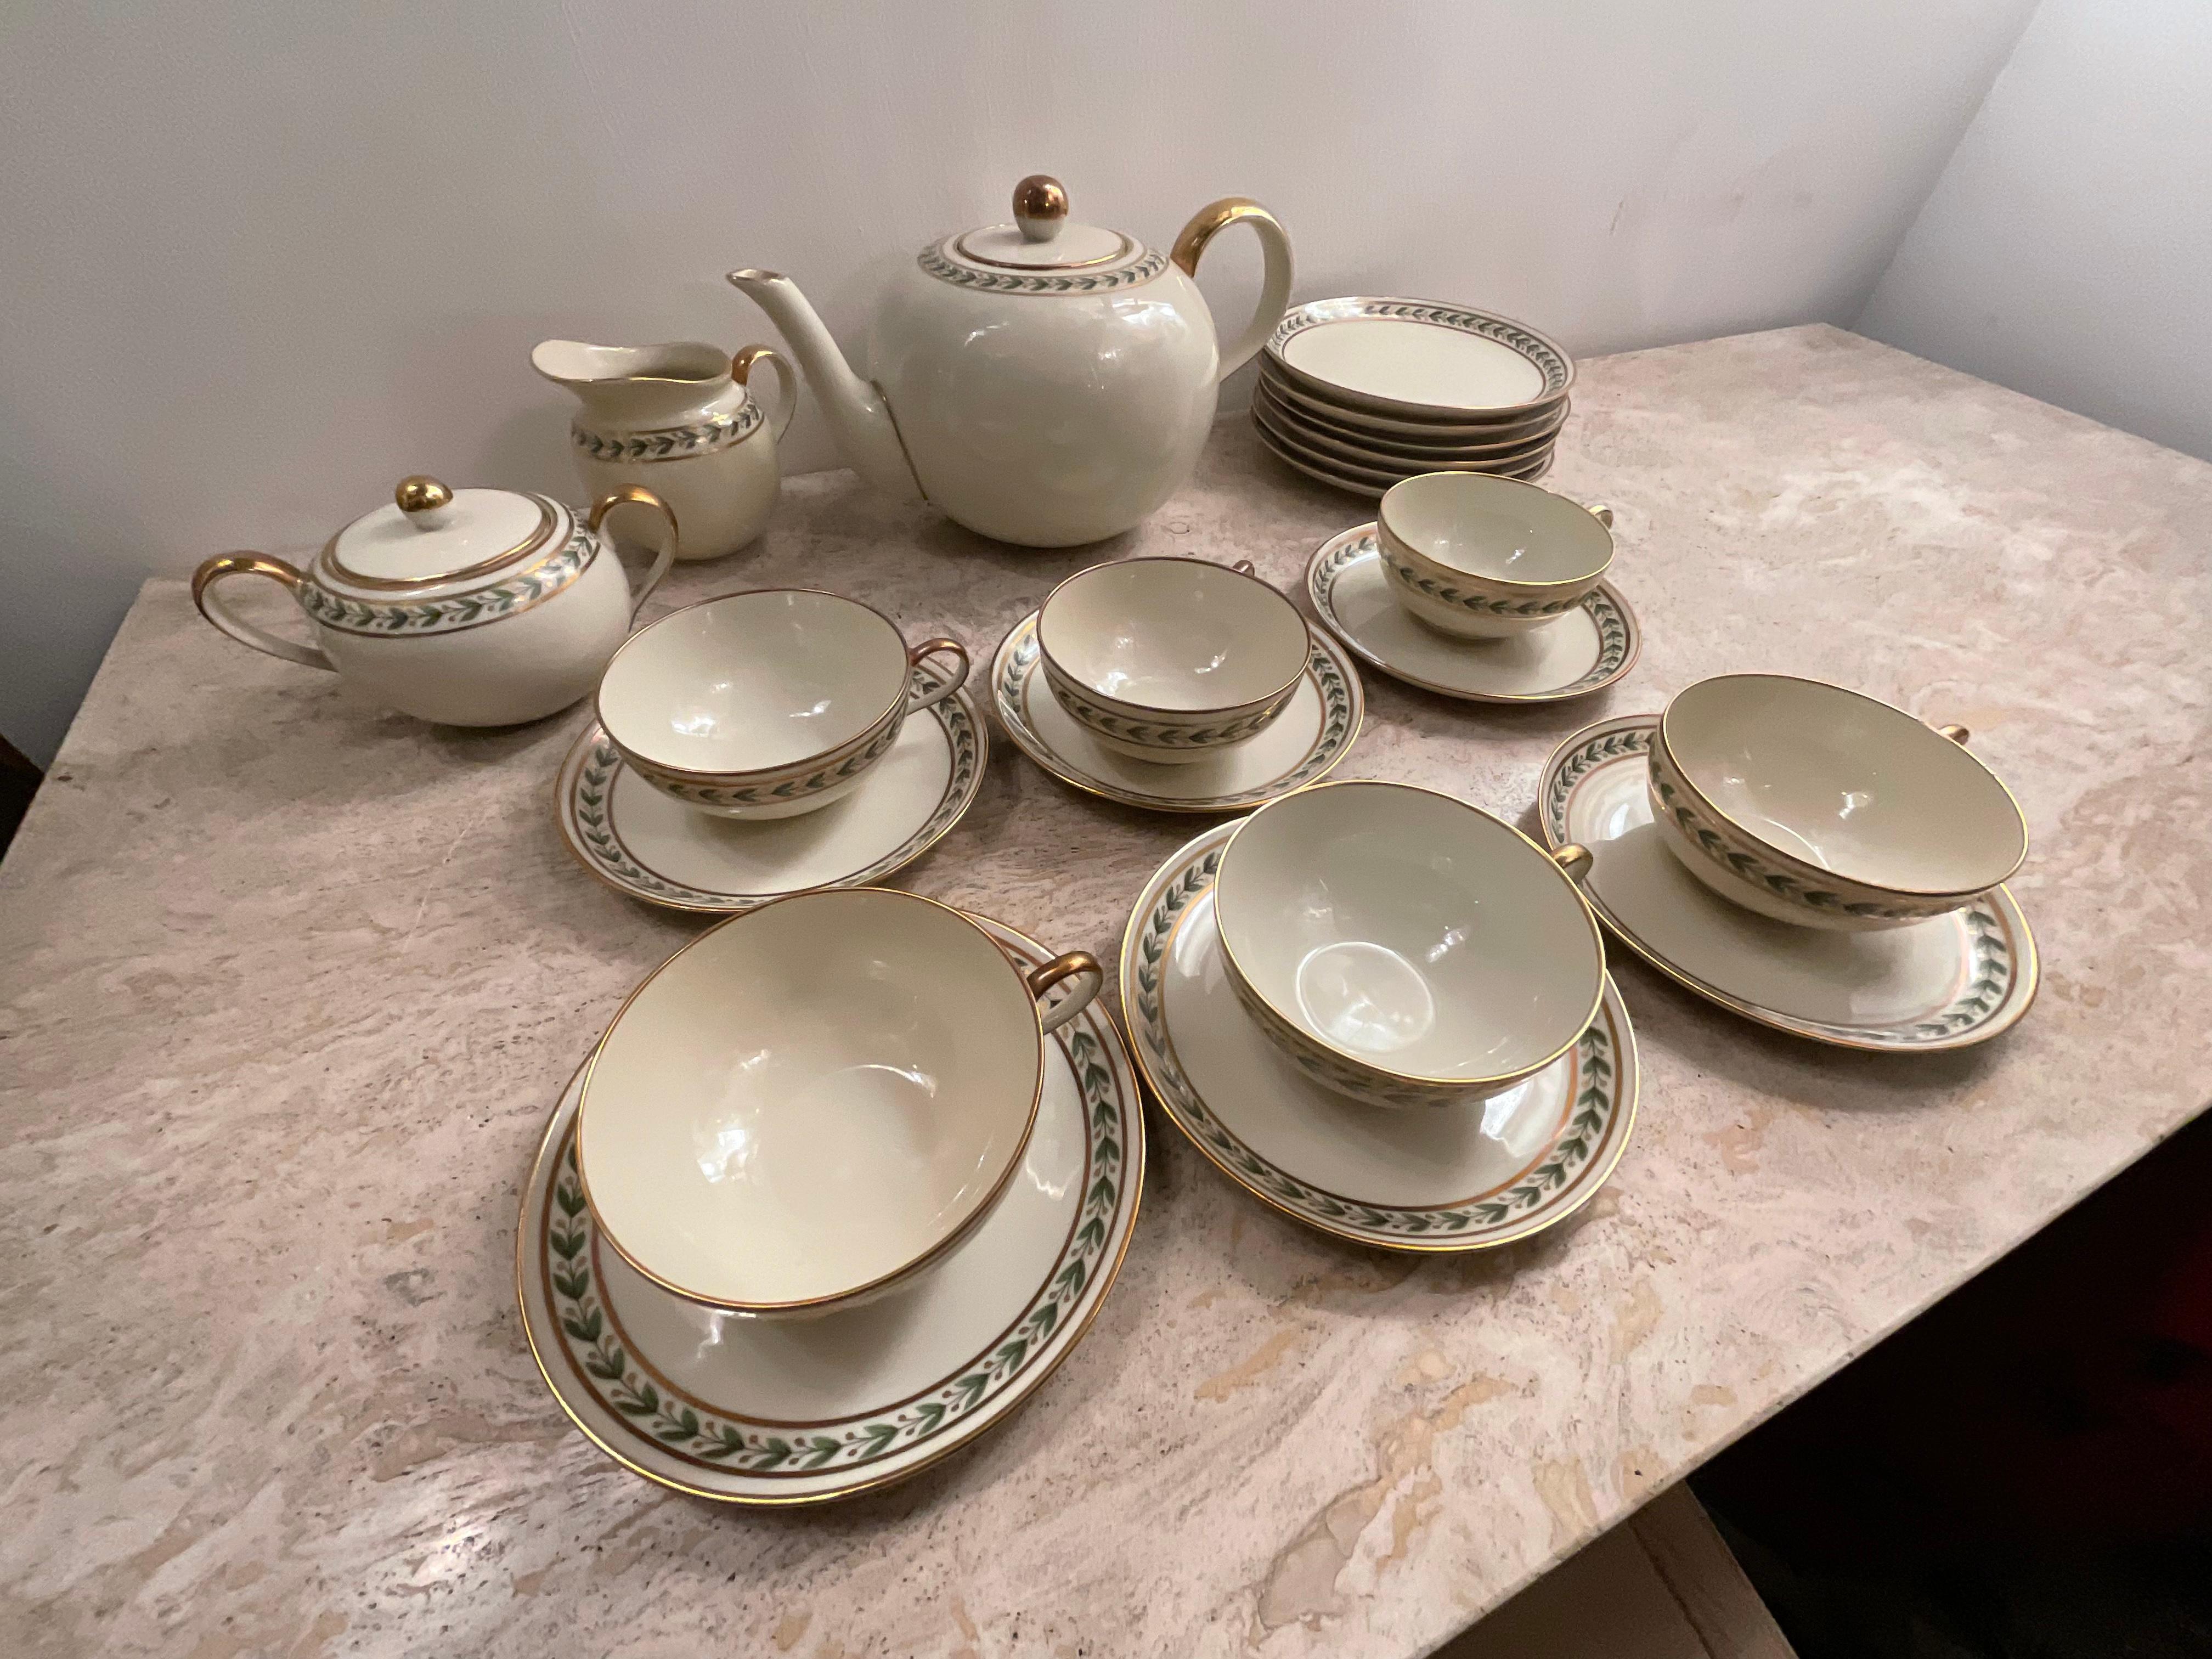 Gio Ponti, Tea for 6 with Dessert Plates, in Porcelain Richard Ginori, Year 1939 For Sale 1